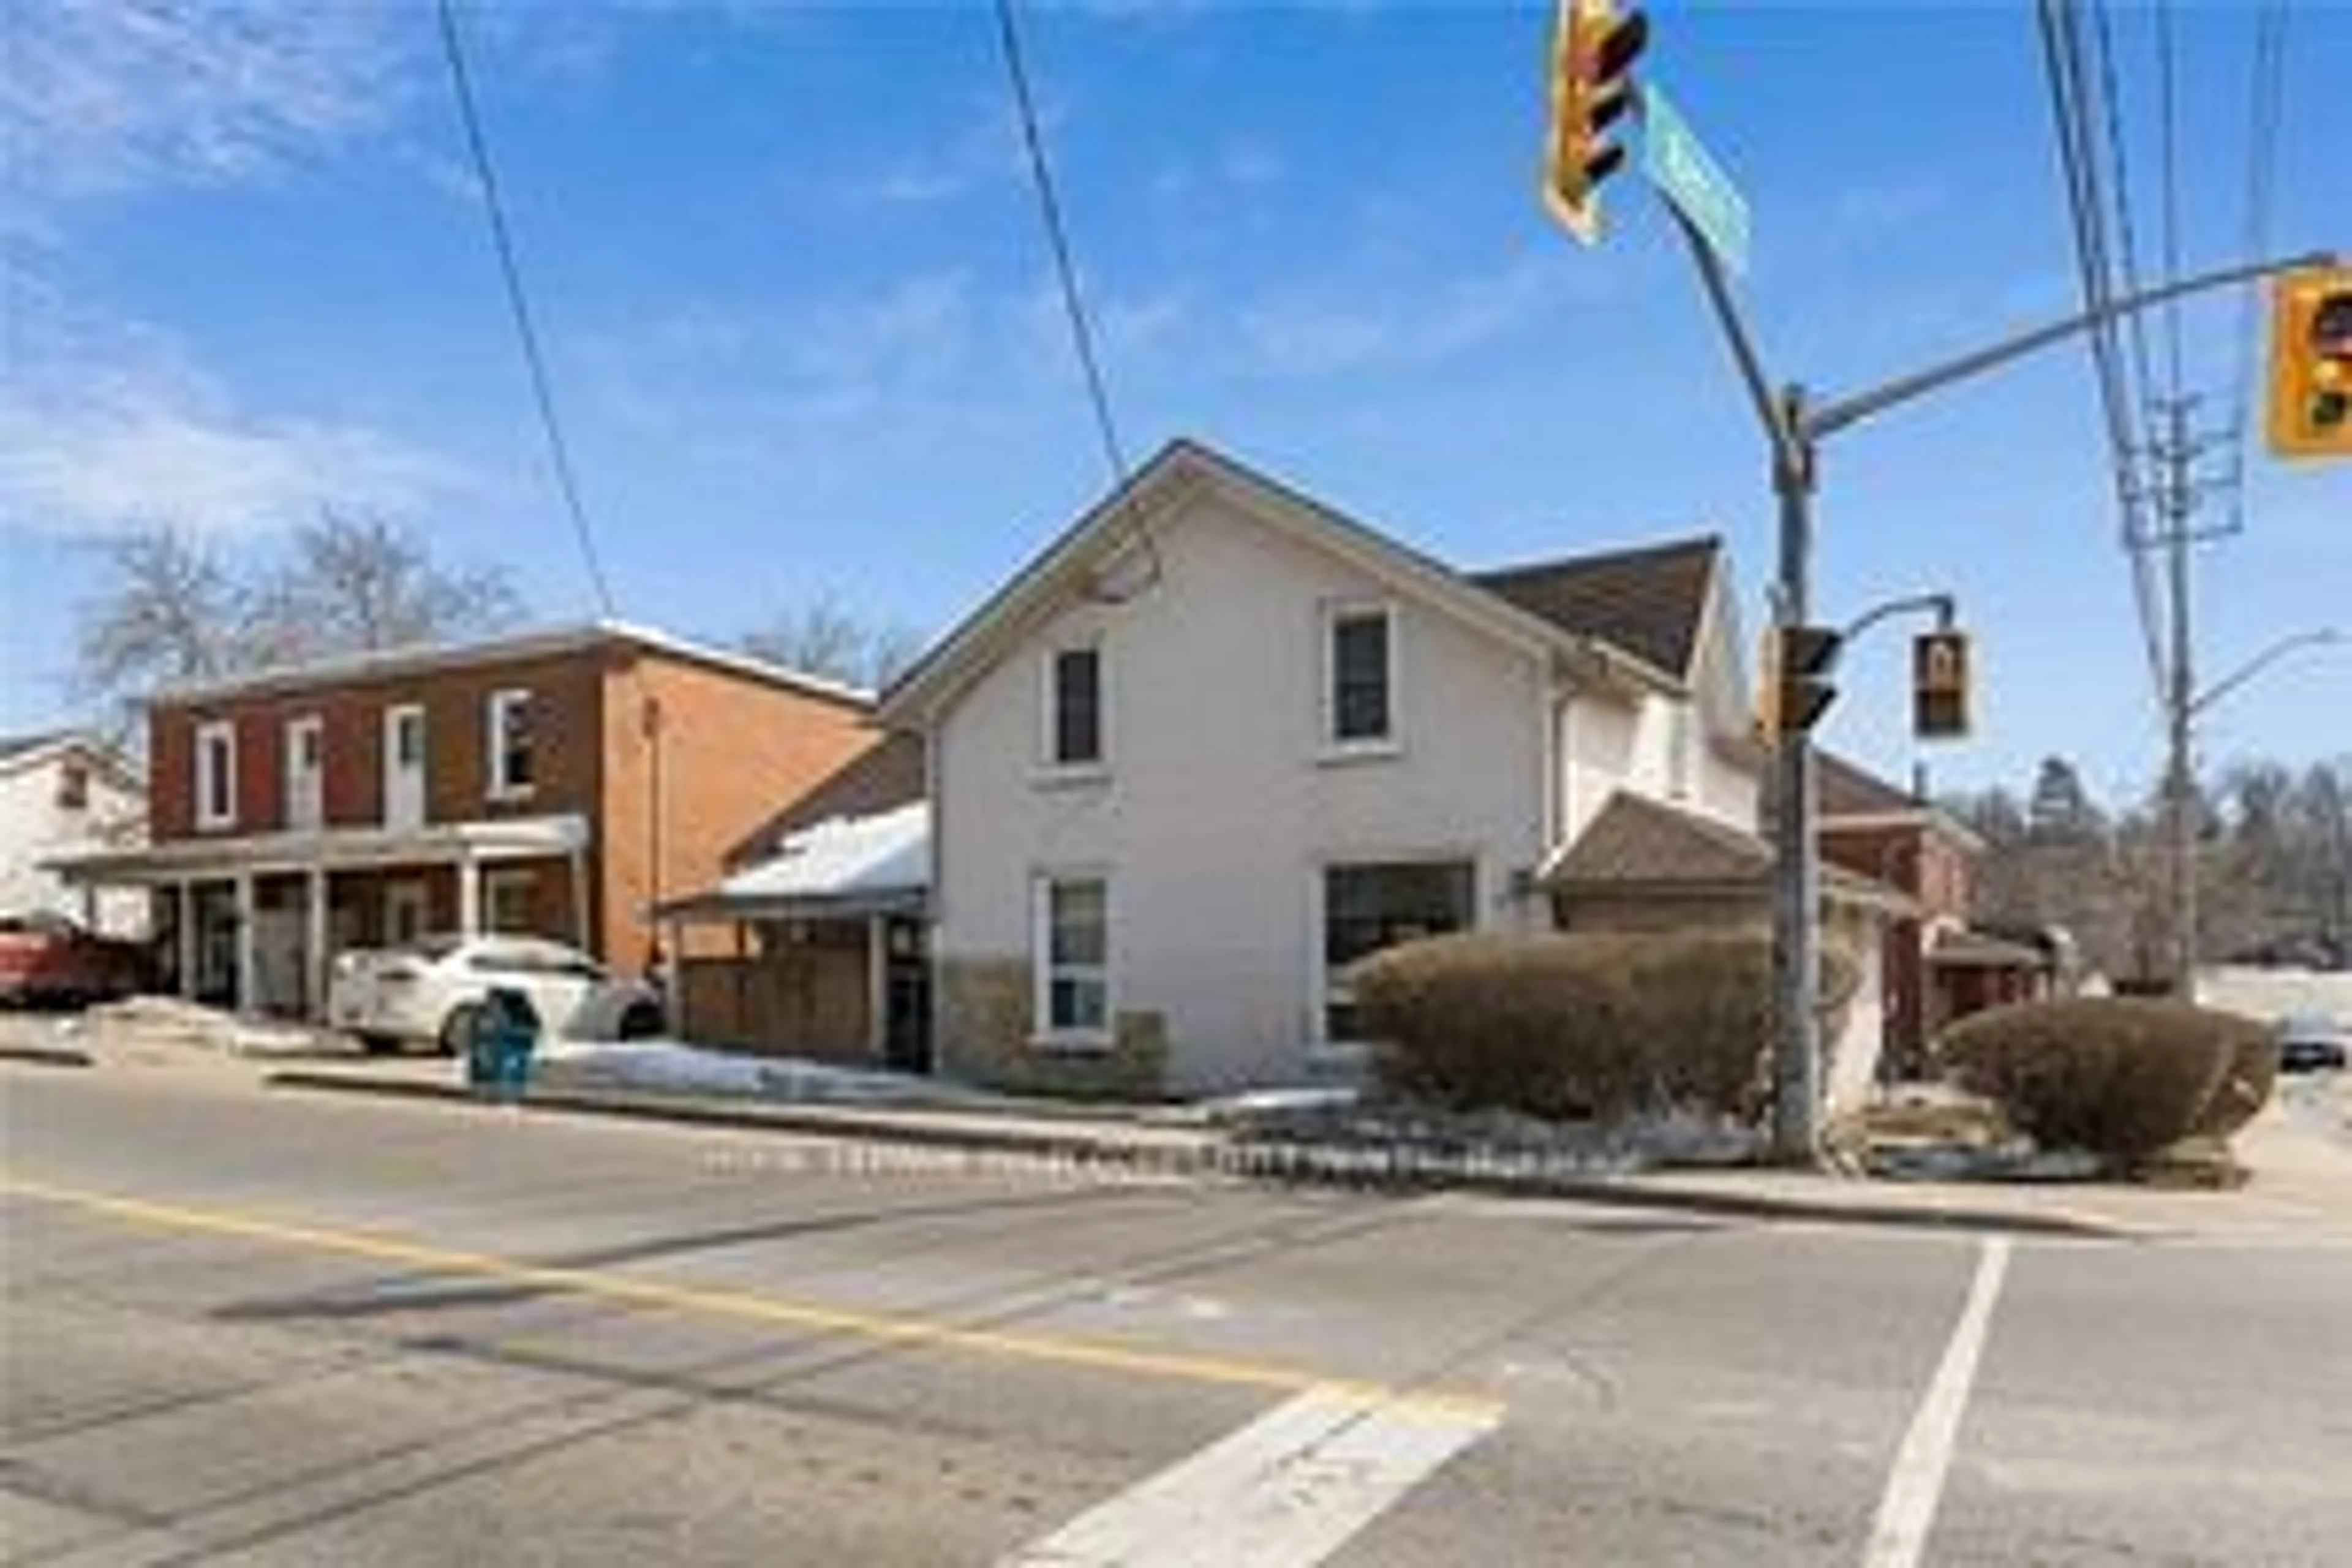 Street view for 57-63 Beverly St, Cambridge Ontario N1R 3Z6